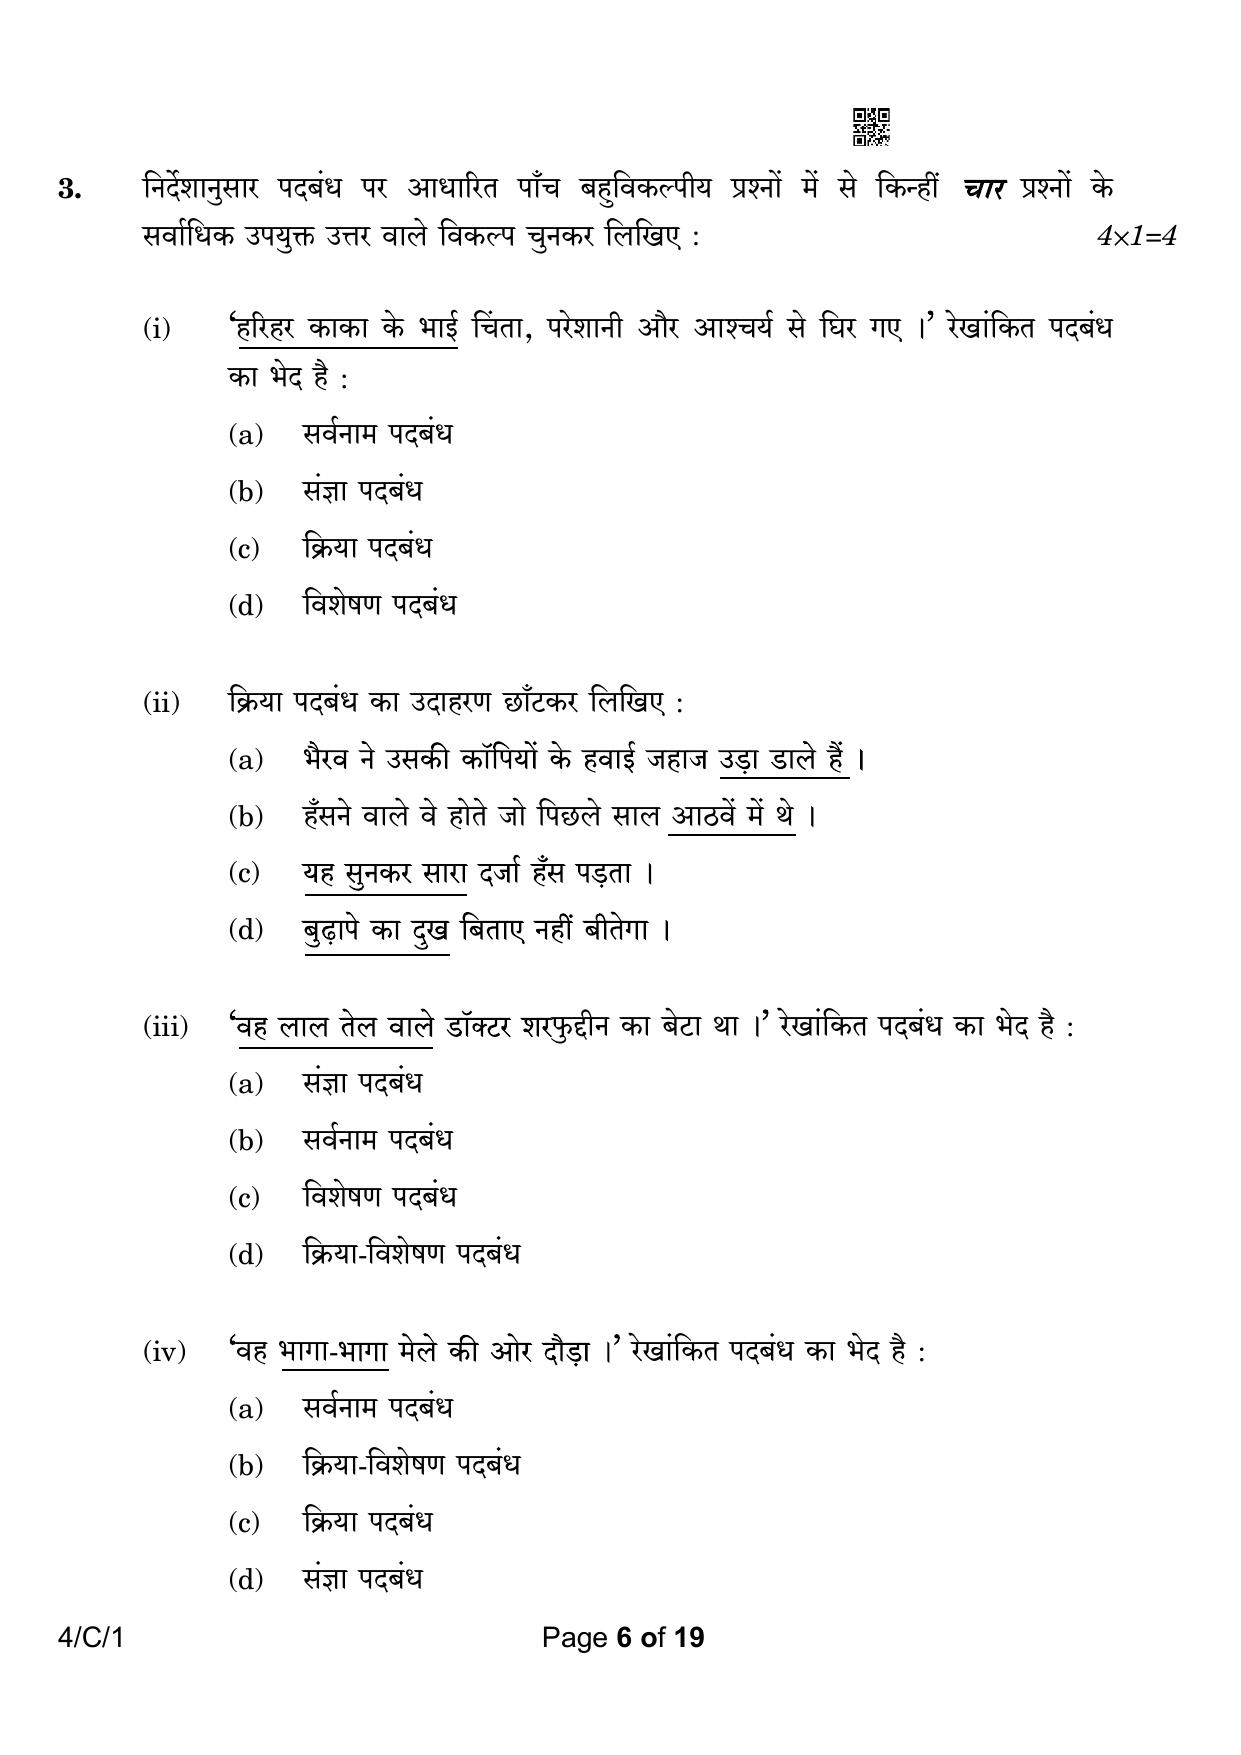 CBSE Class 10 4-1 Hindi B 2023 (Compartment) Question Paper - Page 6